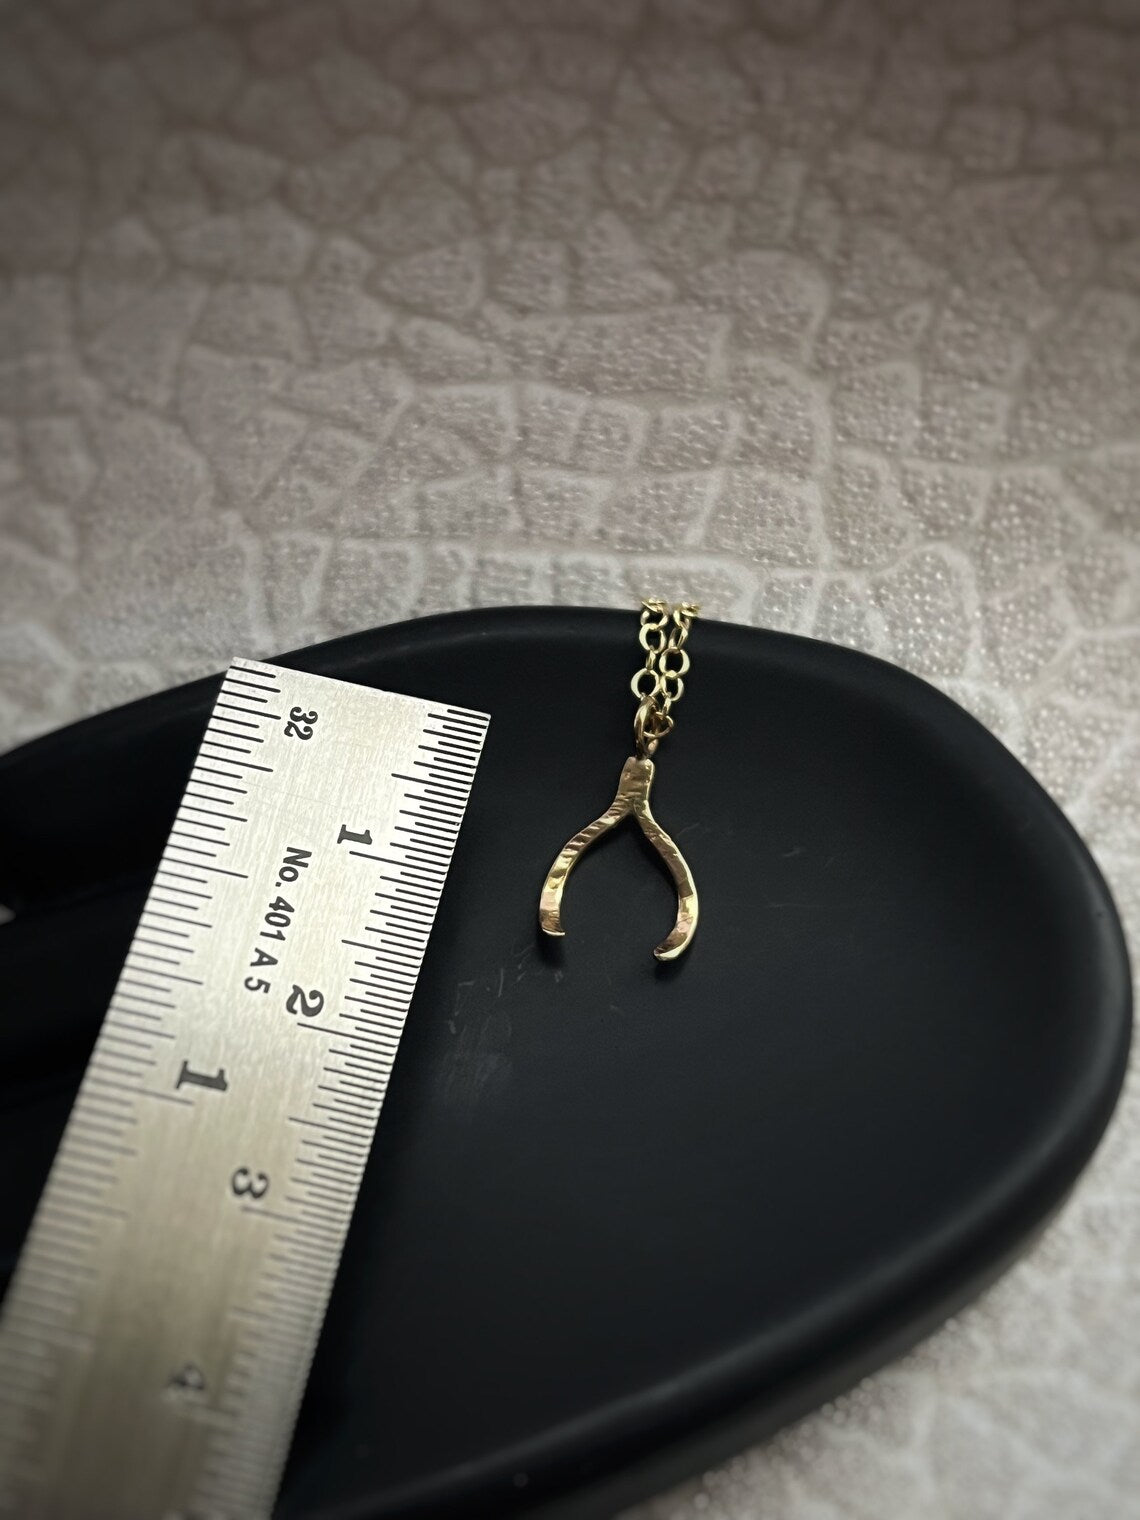 Solid 9ct gold lucky wishbone pendant, a handmade hammered and textured necklace